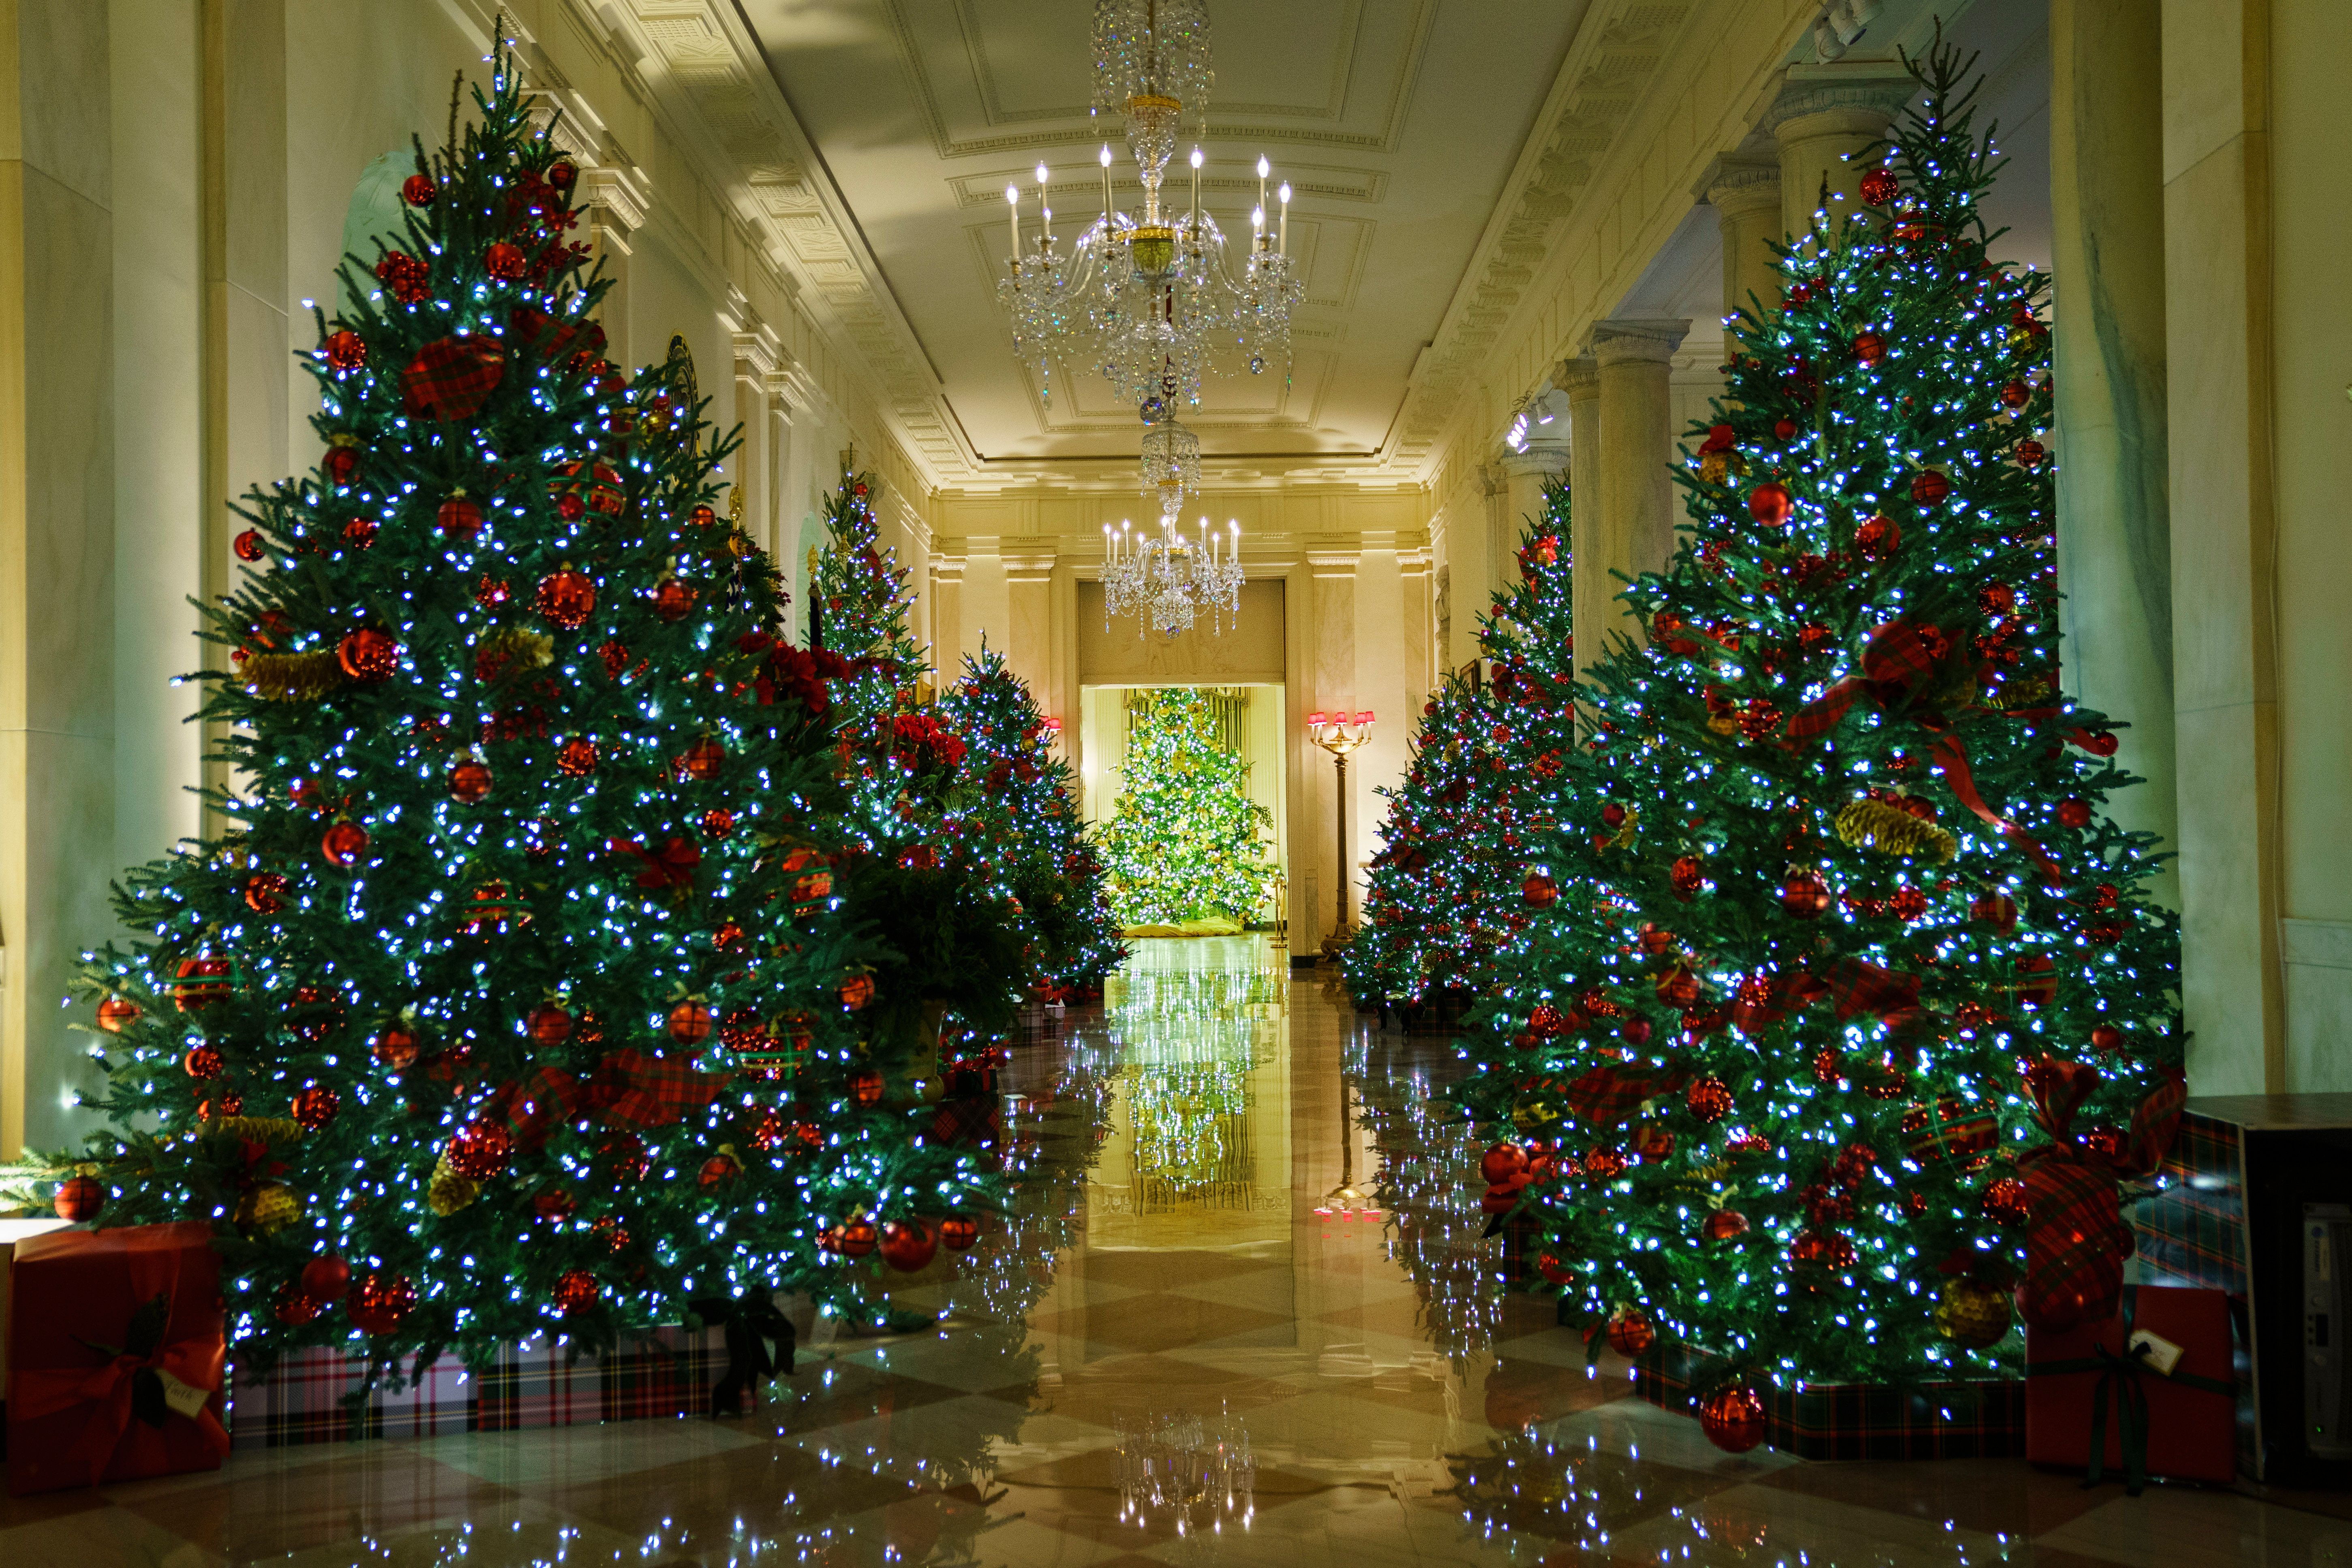 Several Christmas trees lined up. | Source: Getty Images